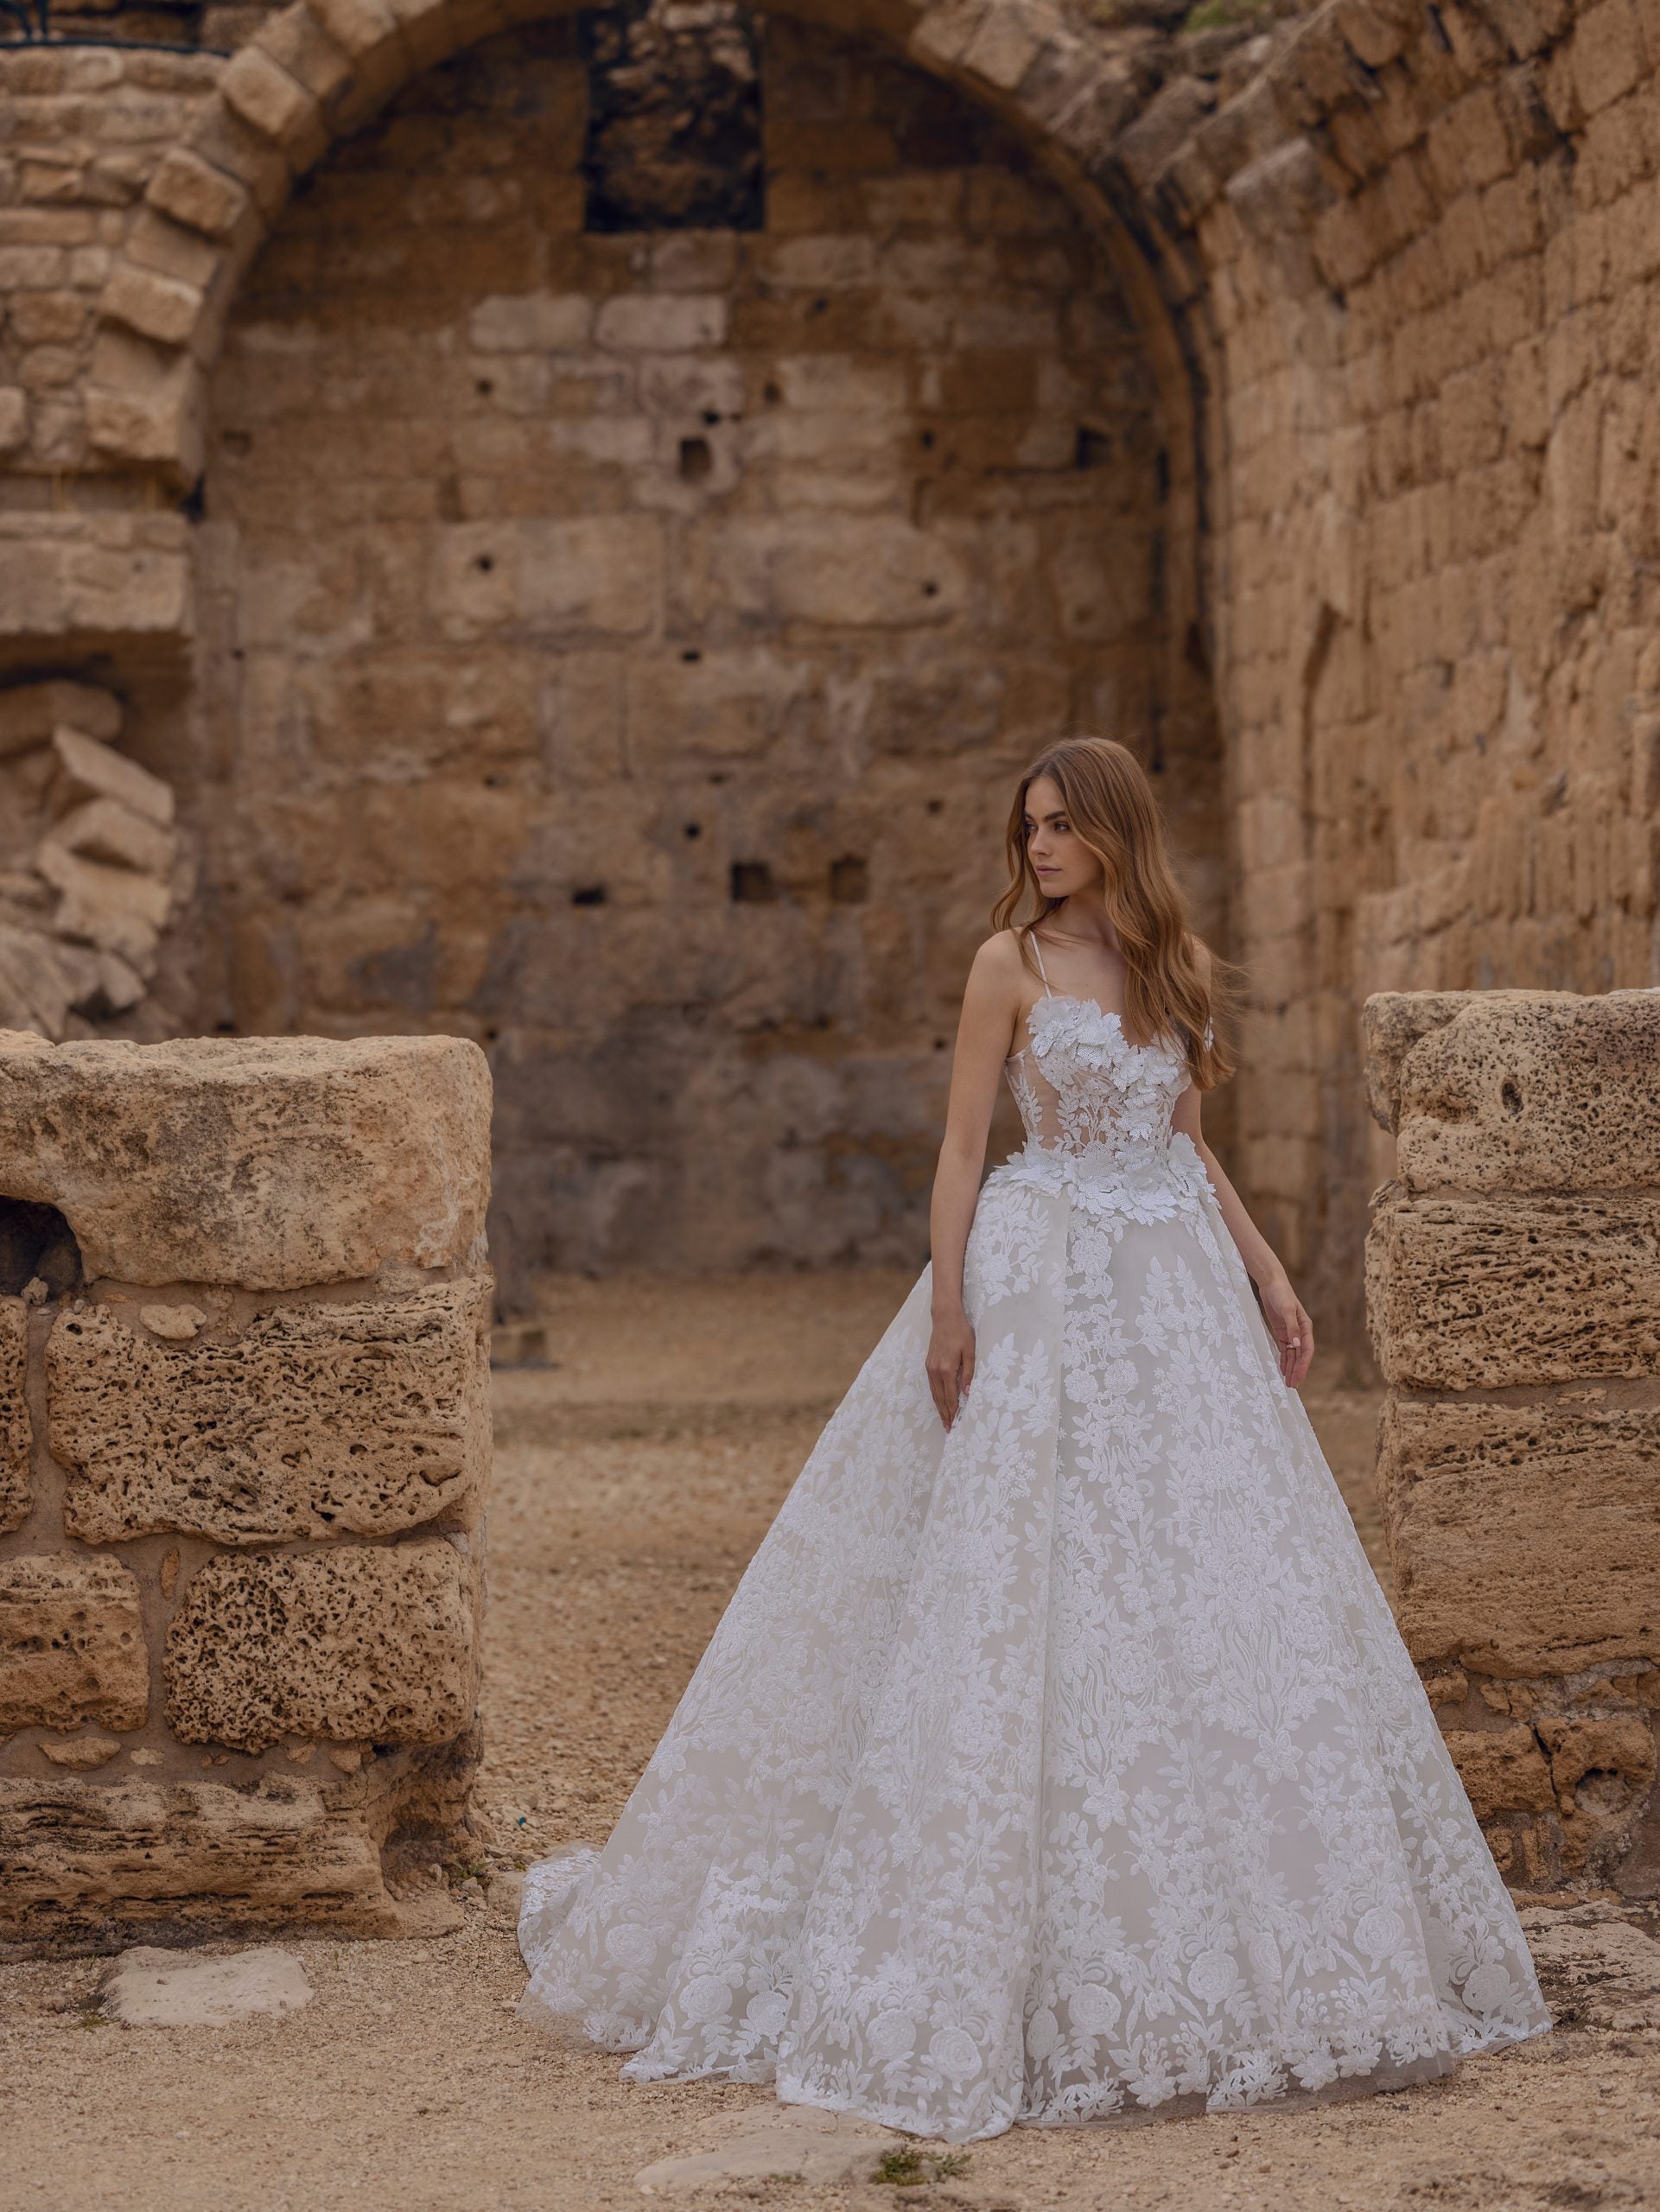 Lace Ball Gown Wedding Dress With Sweetheart Neckline by Love by Pnina Tornai